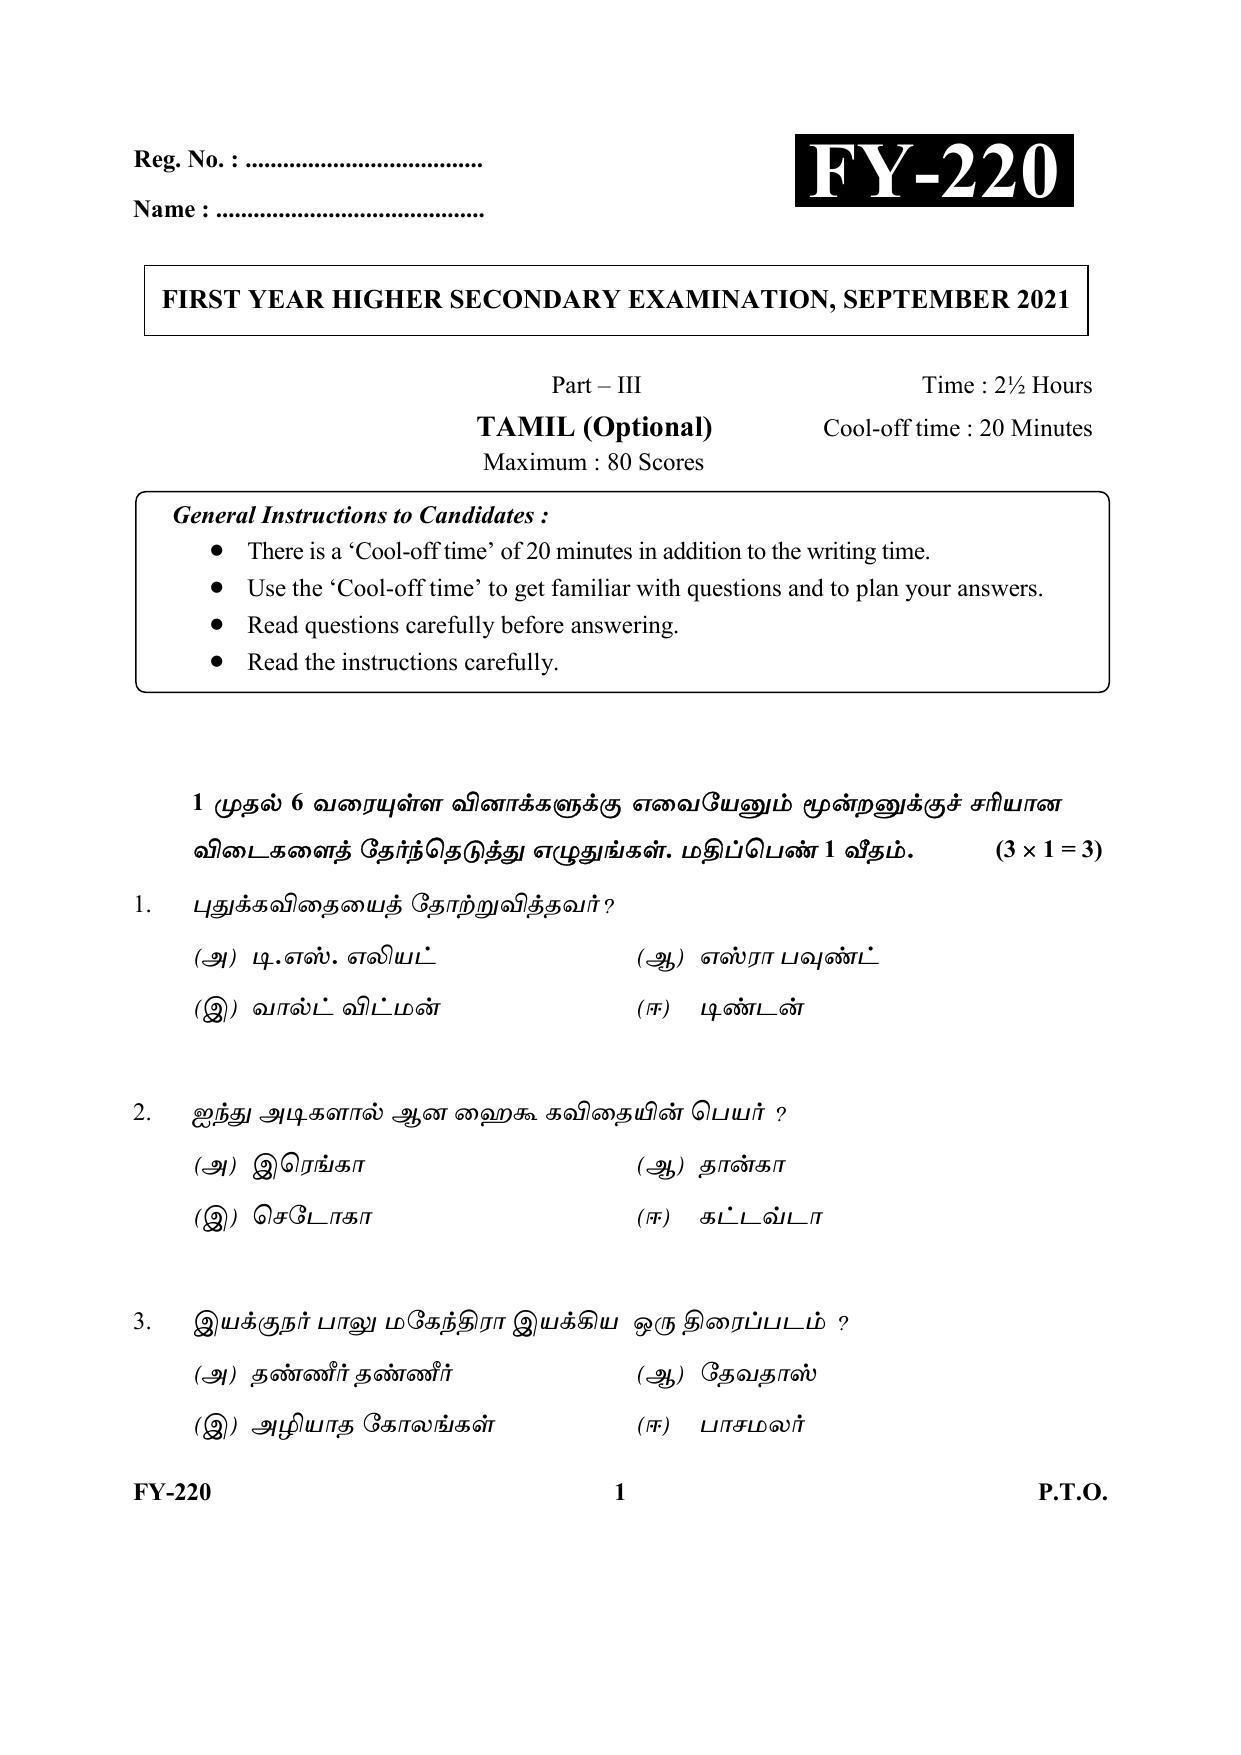 Kerala Plus One (Class 11th) Part-III Tamil-Optional Question Paper 2021 - Page 1